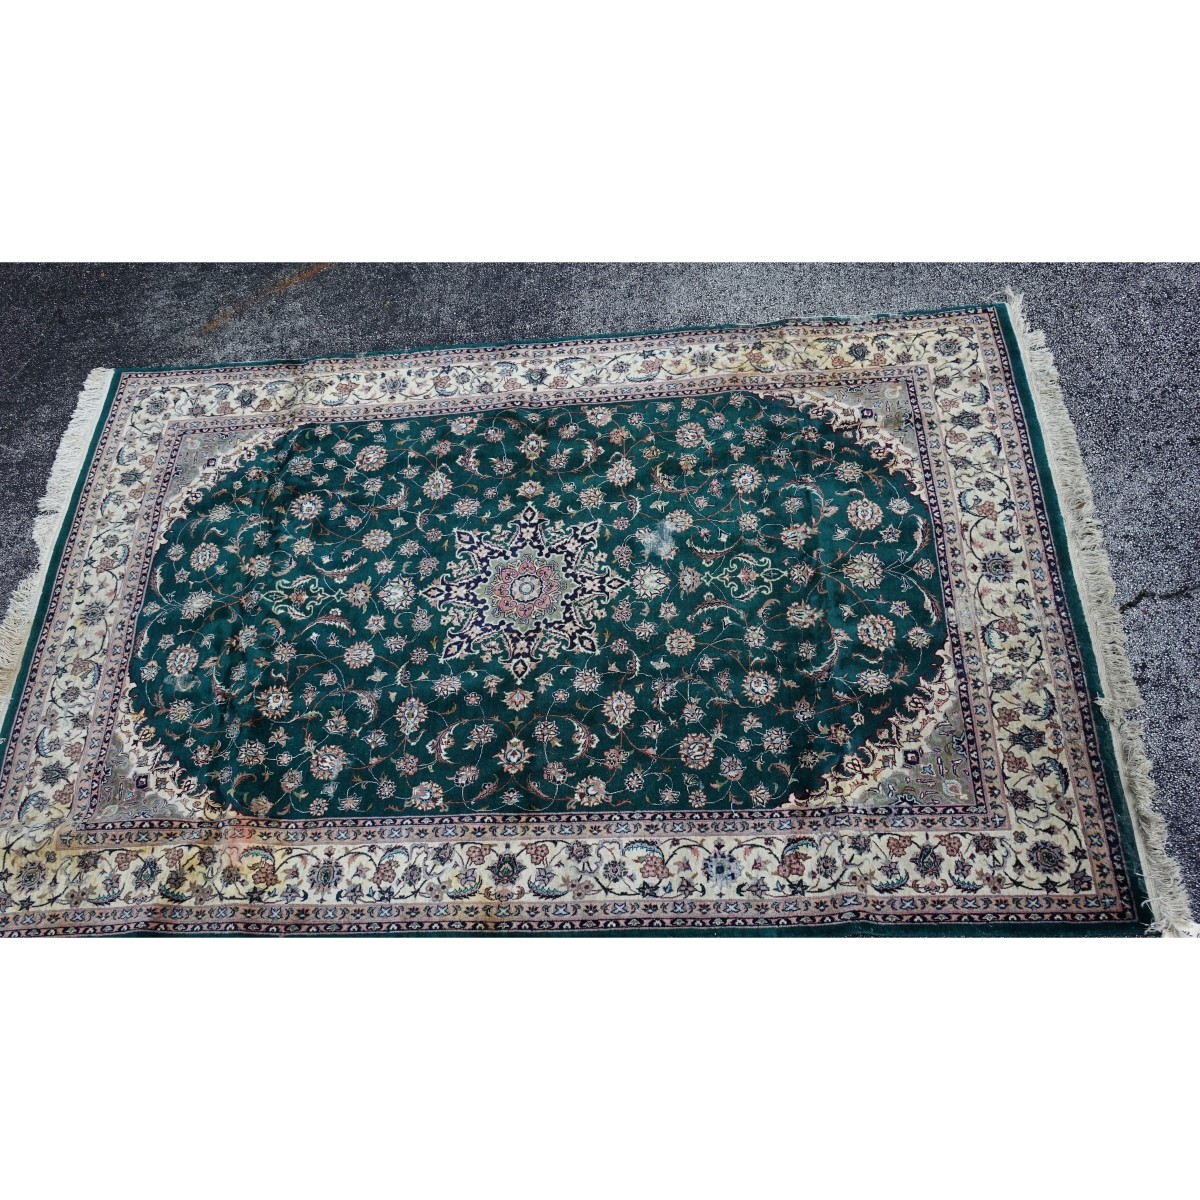 Oriental Rug Green with White Boarder